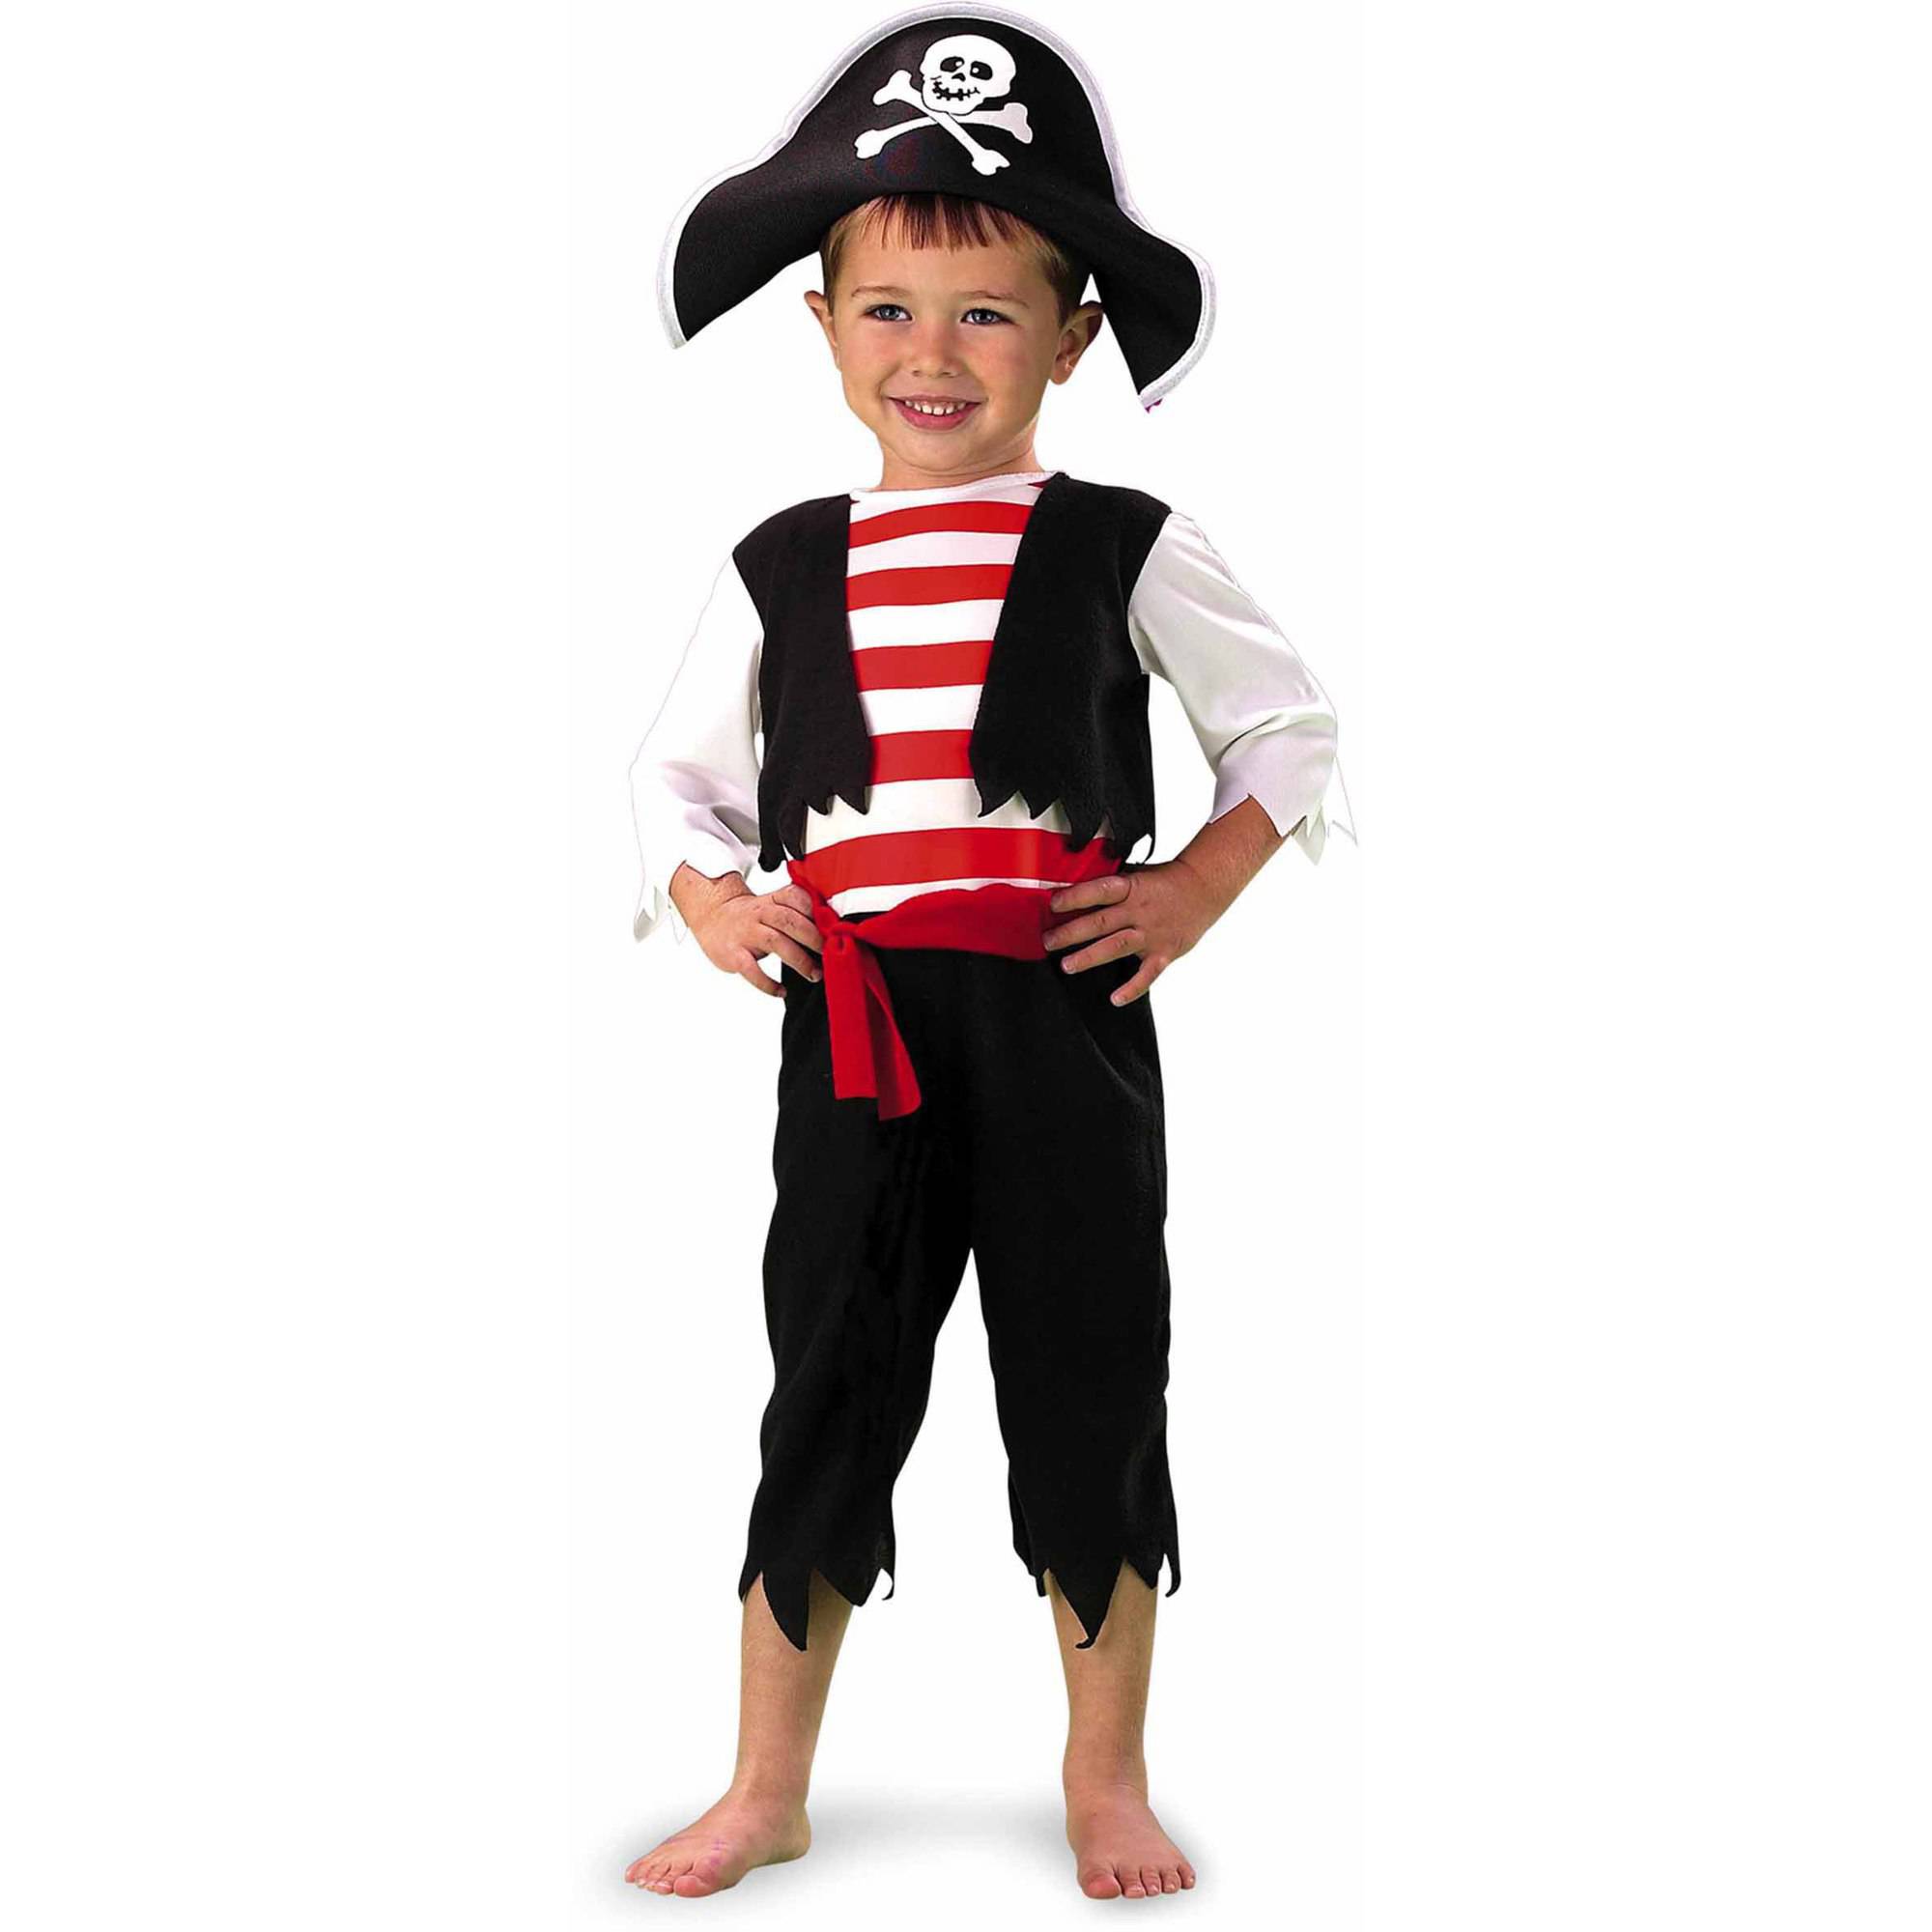 Disguise Pint Size Pirate Toddler Dress Up / Halloween Costume - image 1 of 2